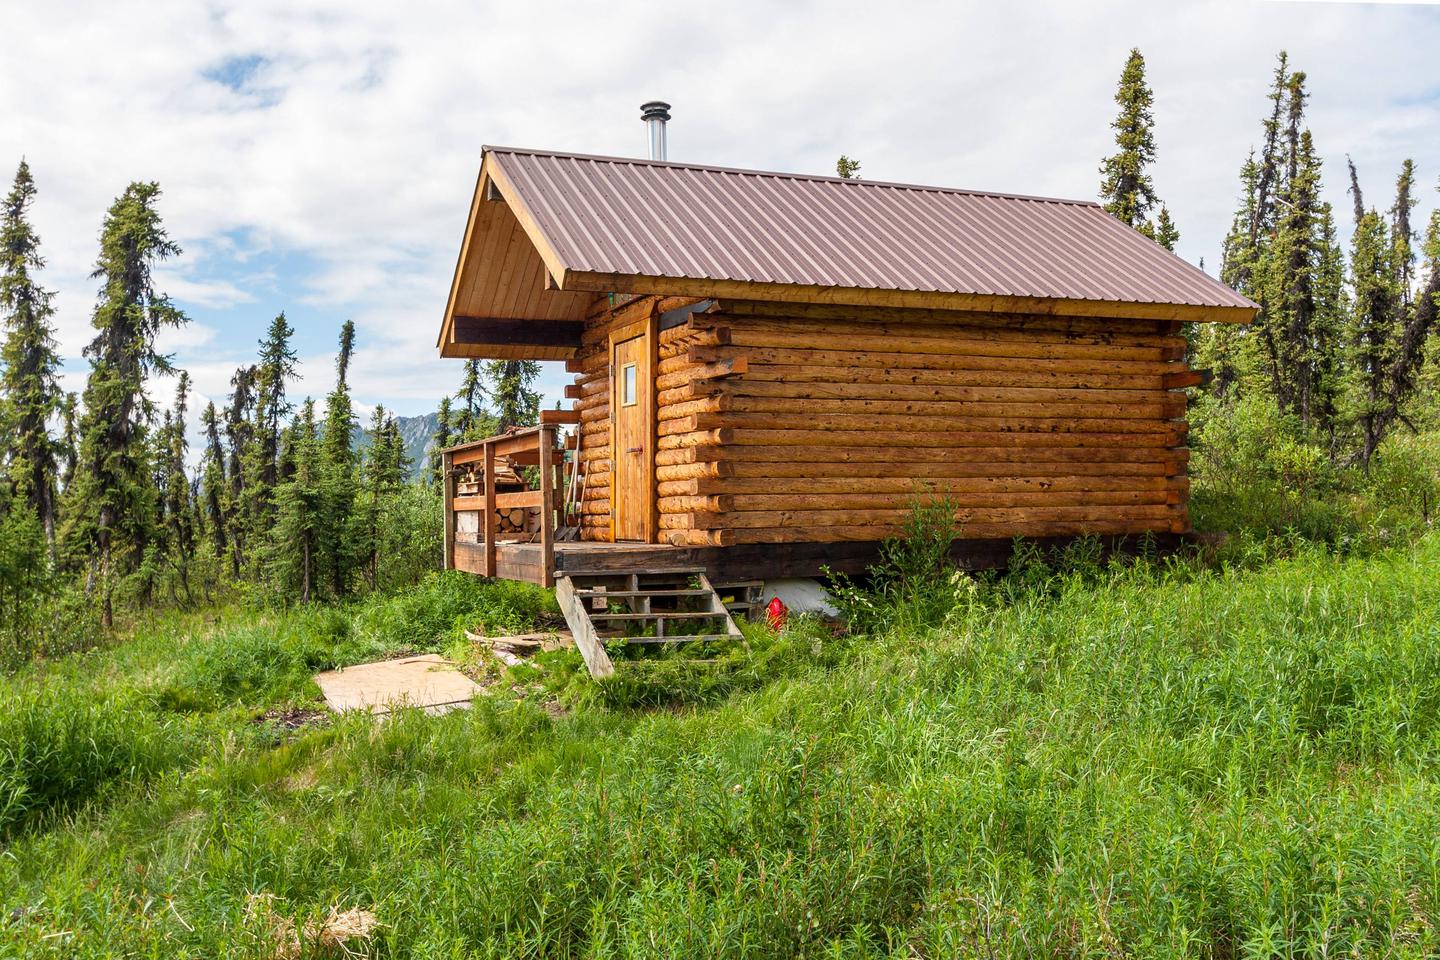 A cabin sits on a hillside surrounded by green grass and spruce trees.Borealis-LeFevre Cabin in summer